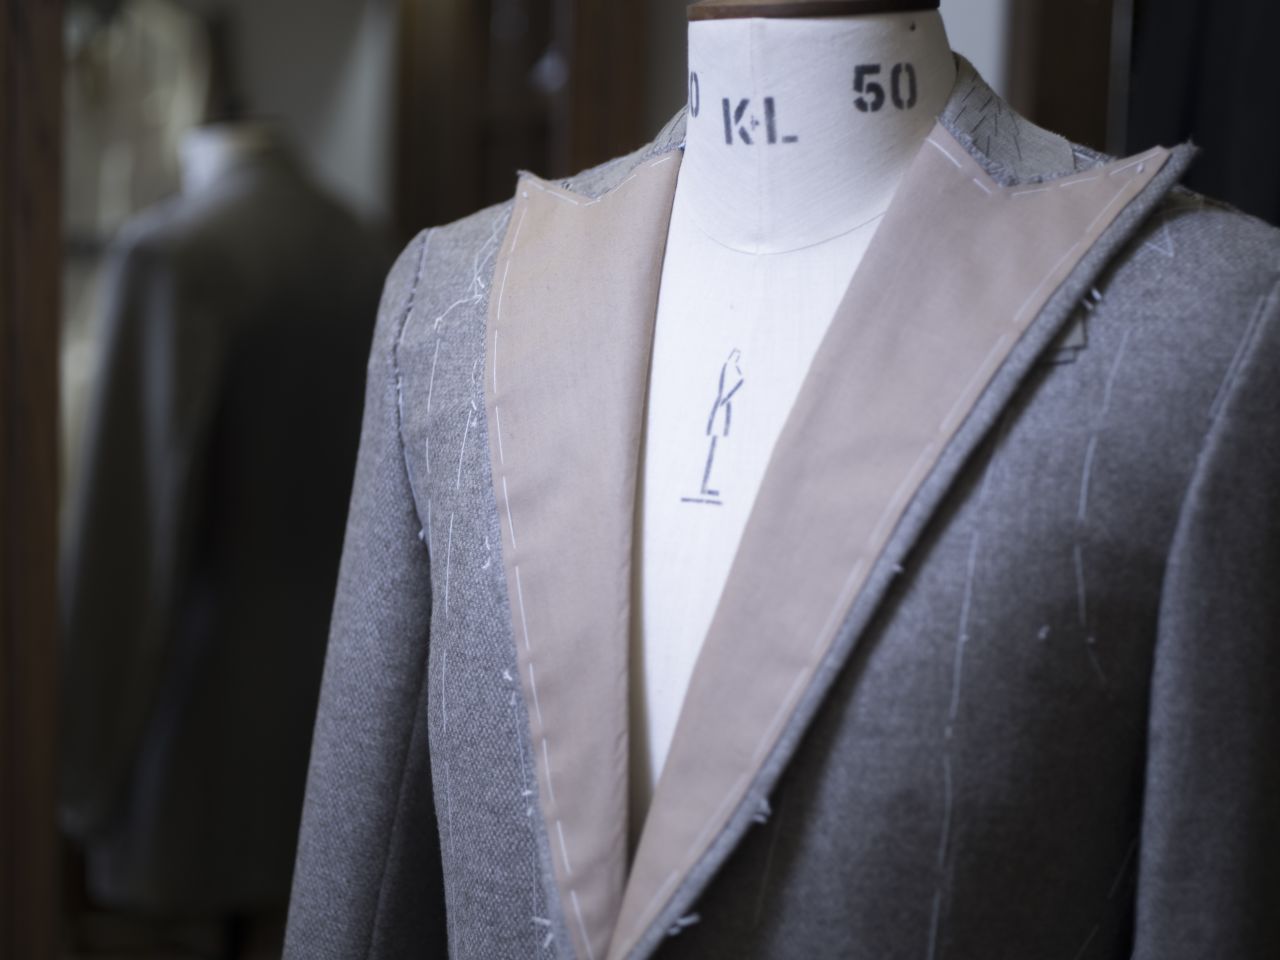 Savile Row tailor Huntsman is one of the high-end retailers that have teamed up with Tengri. <br />